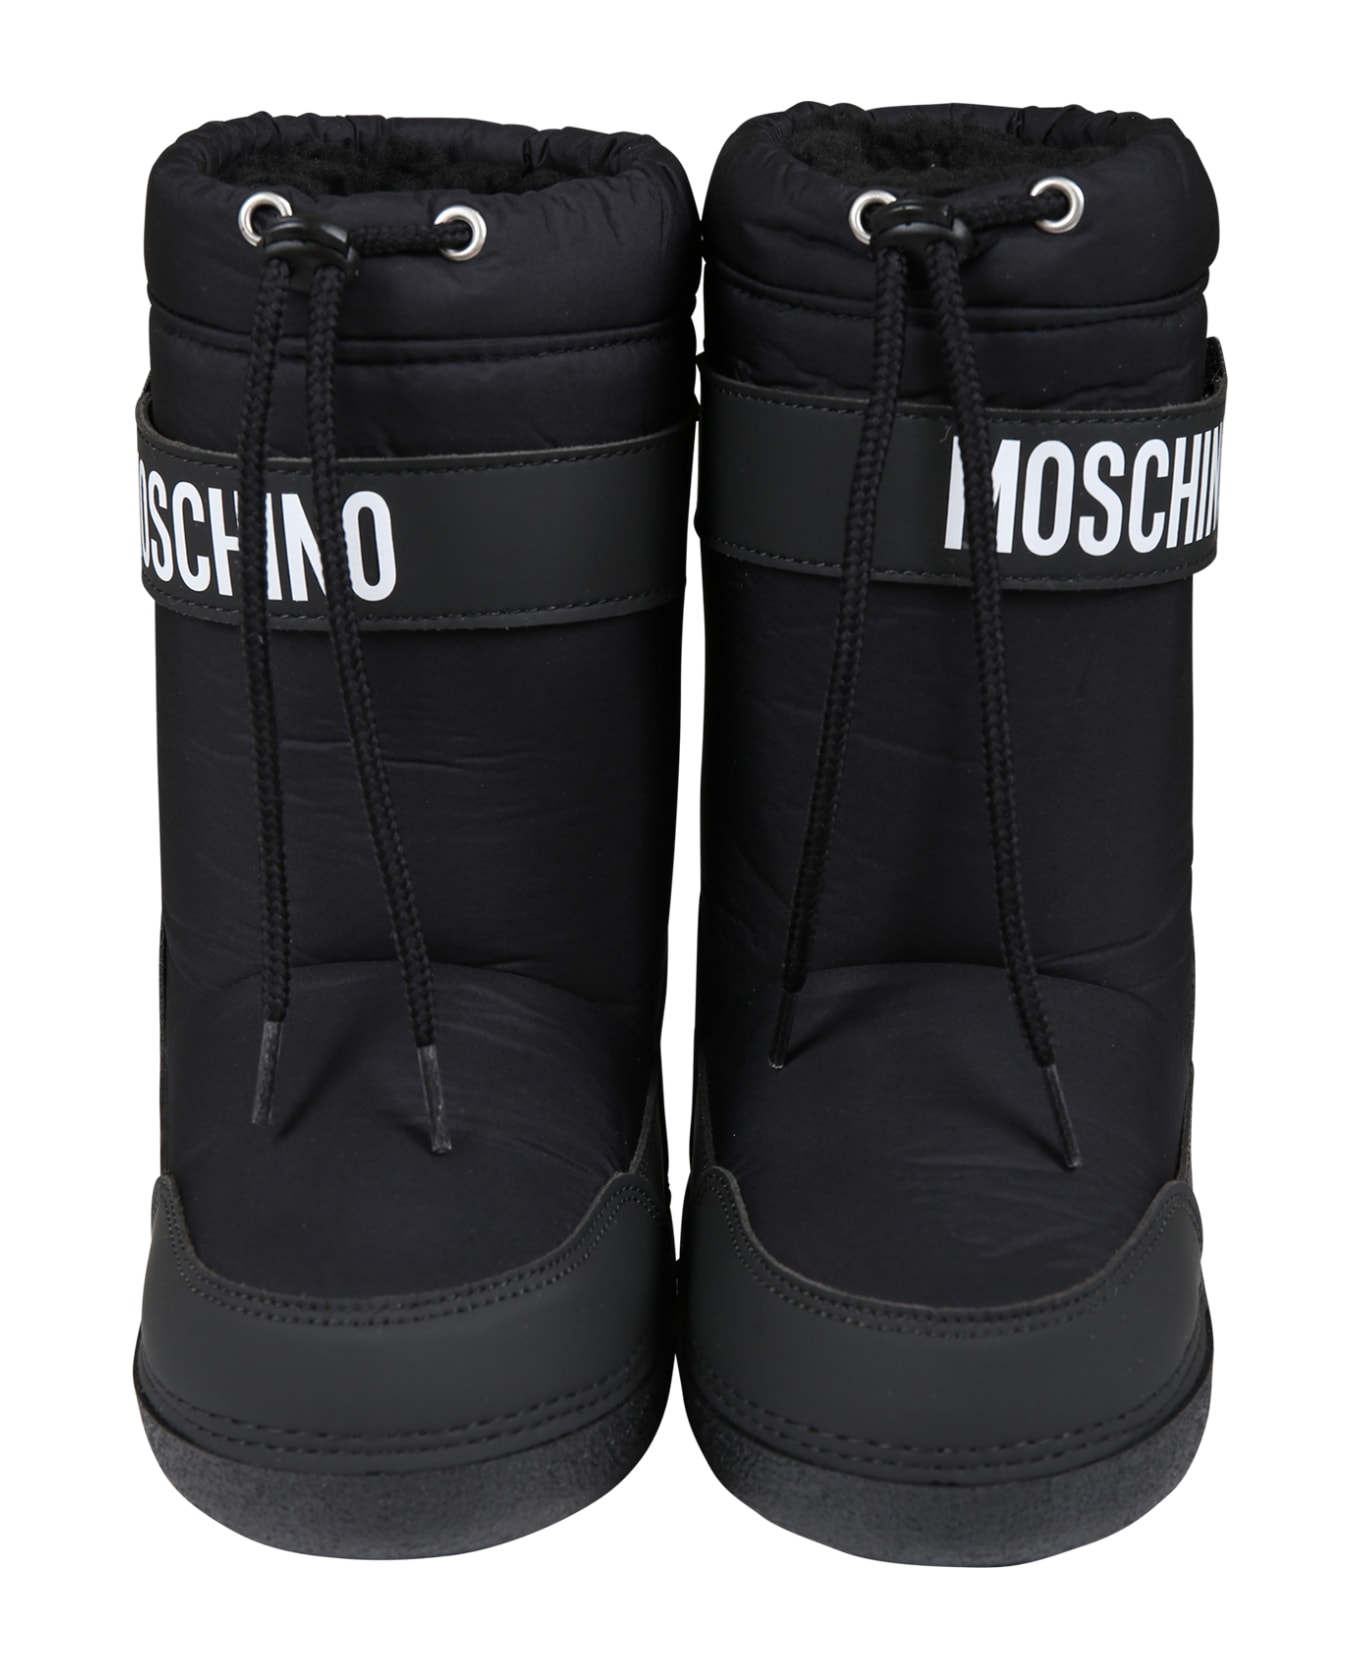 Moschino Balck Boots For Girl With Teddy Bear And Logo - Black シューズ